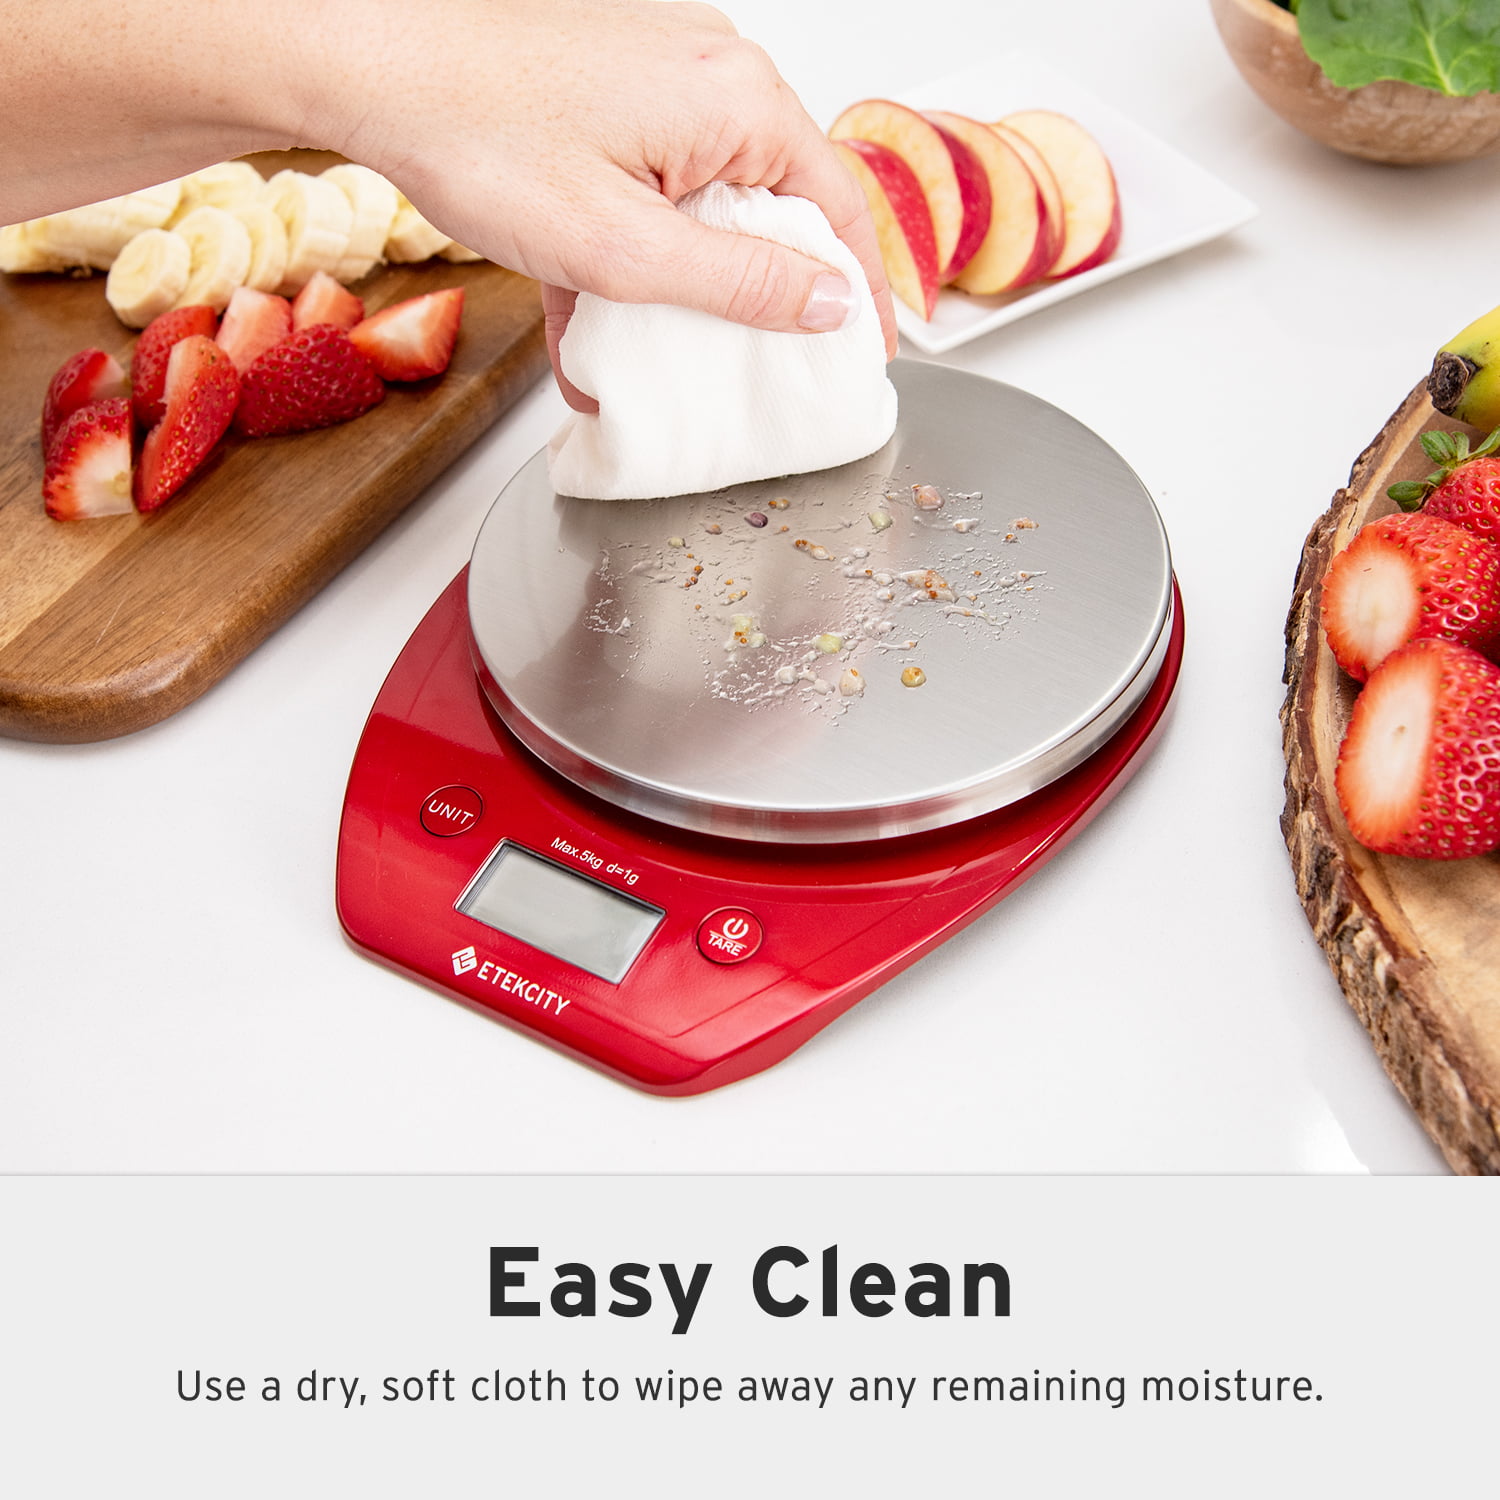 Etekcity ESN-C551S food scale review: An inexpensive way to keep